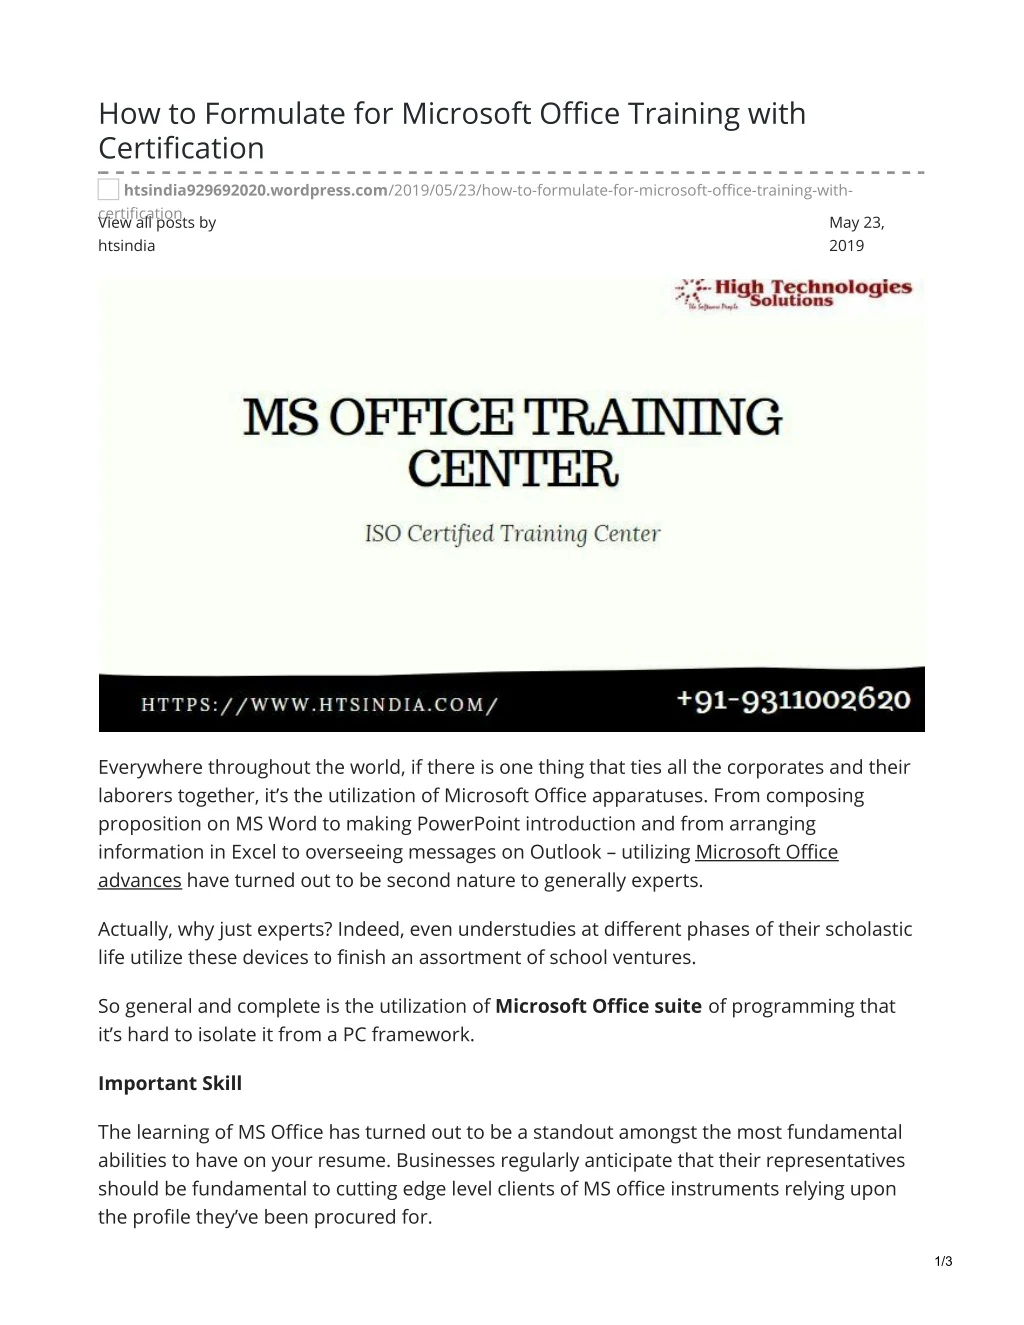 how to formulate for microsoft office training